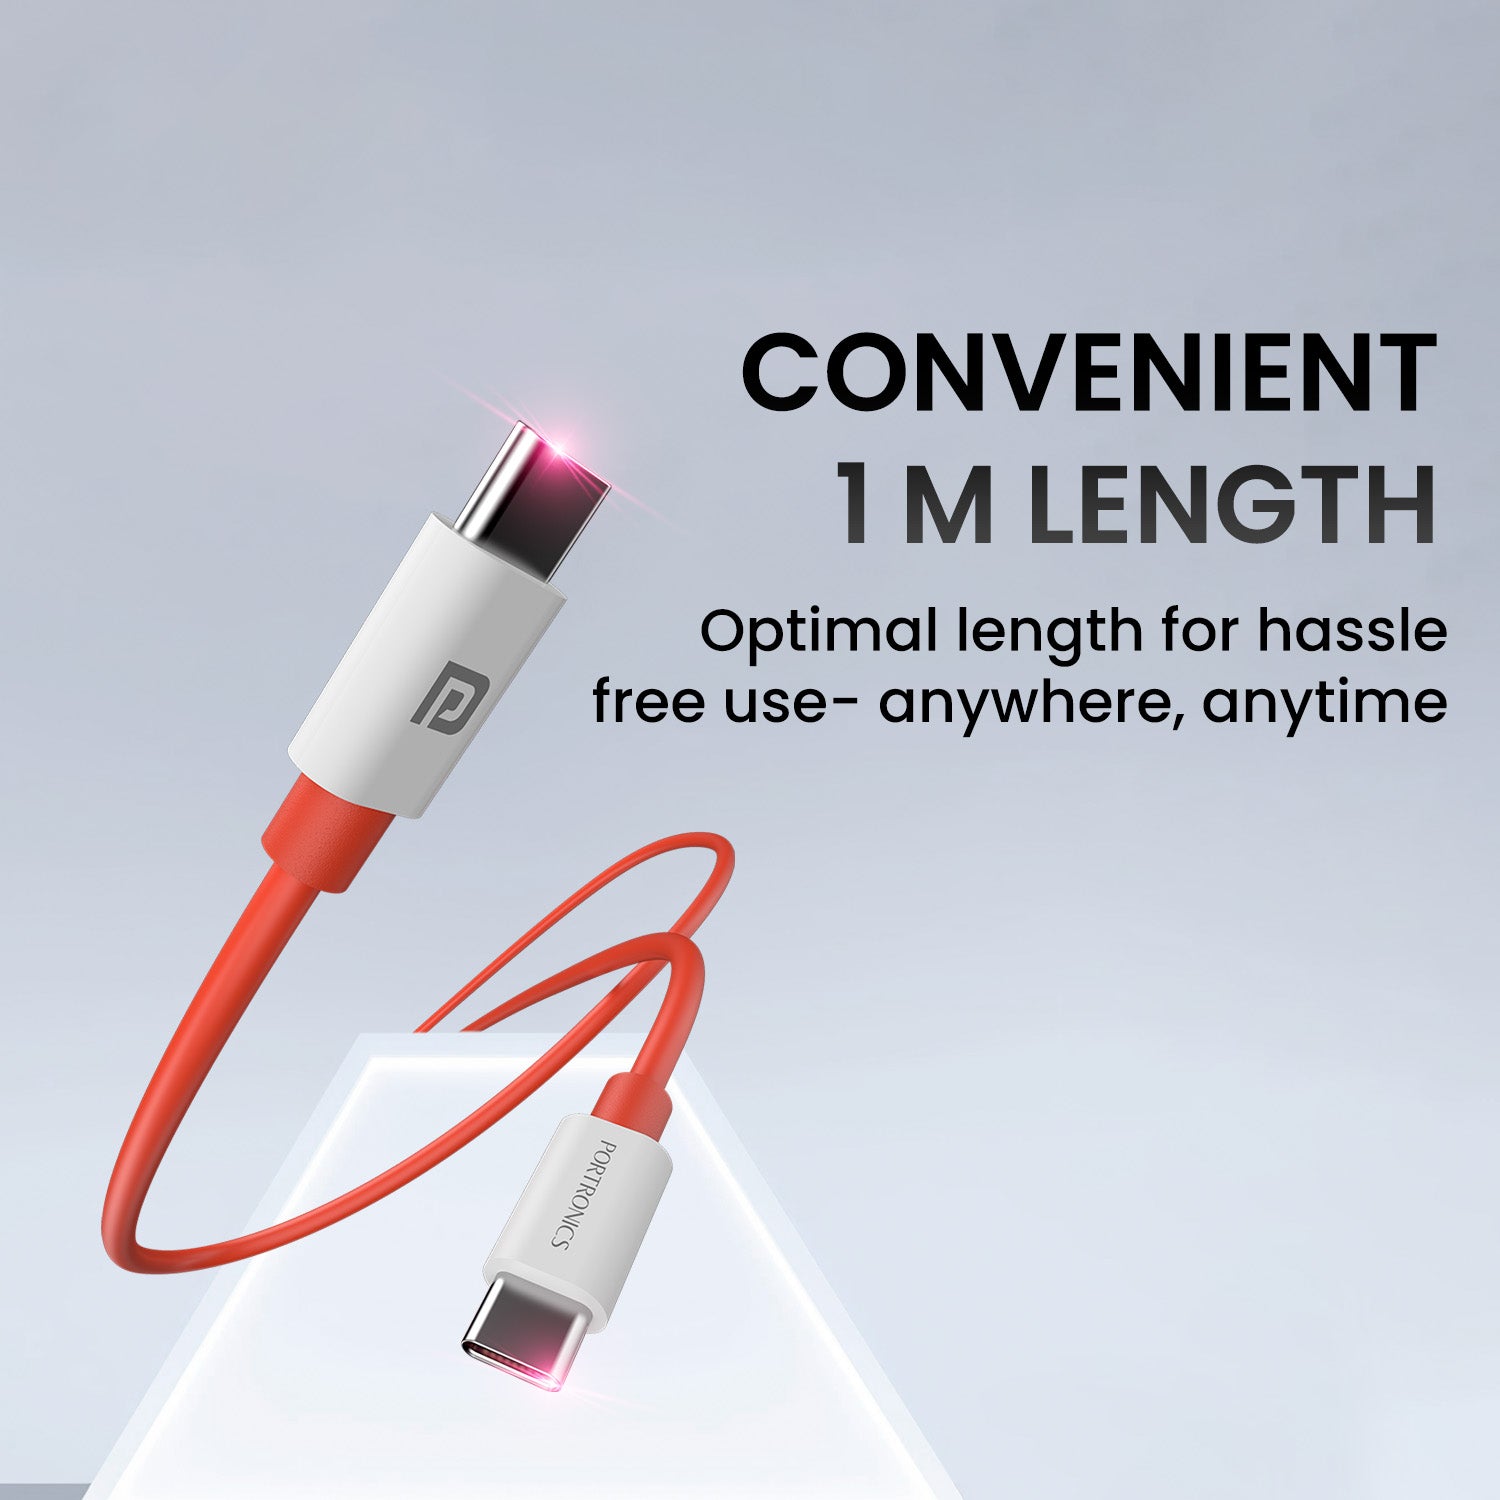 orange Portronics Konnect Dash Max 65w Type to type c charging cable| type c charging cable| type c to type c cable 1 meter length